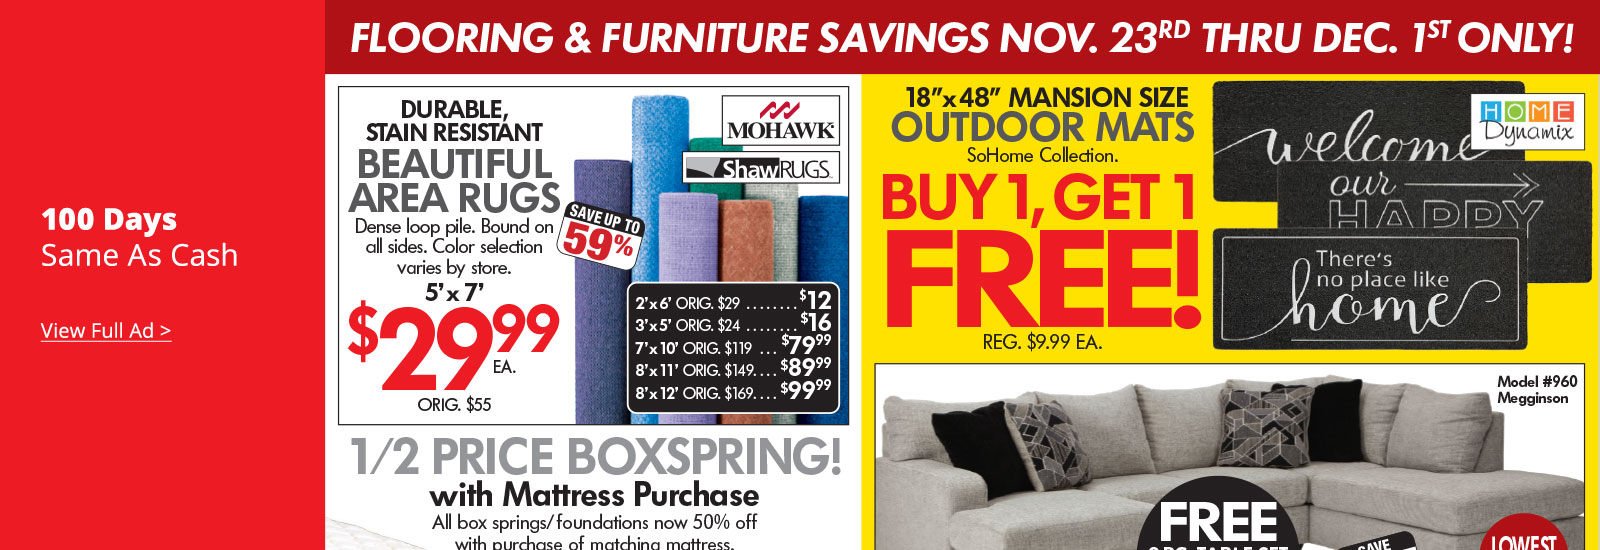 Flooring and Furniture Savings - View our Ad